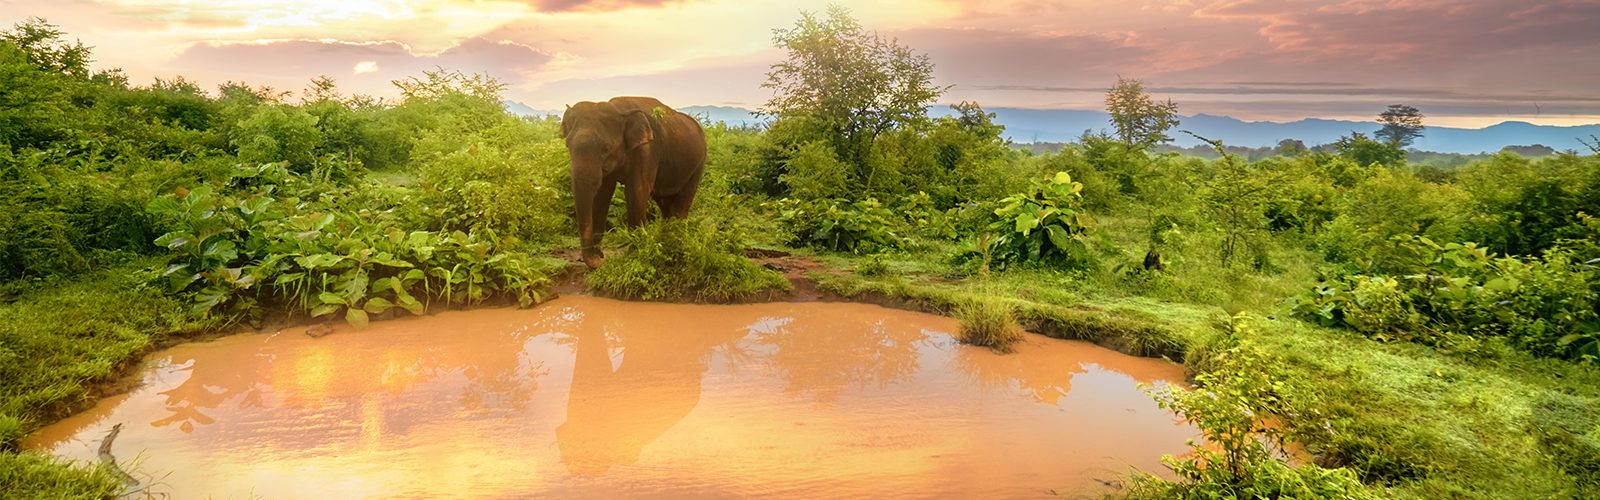 The Most Incredible Destinations For A Safari Holiday Header